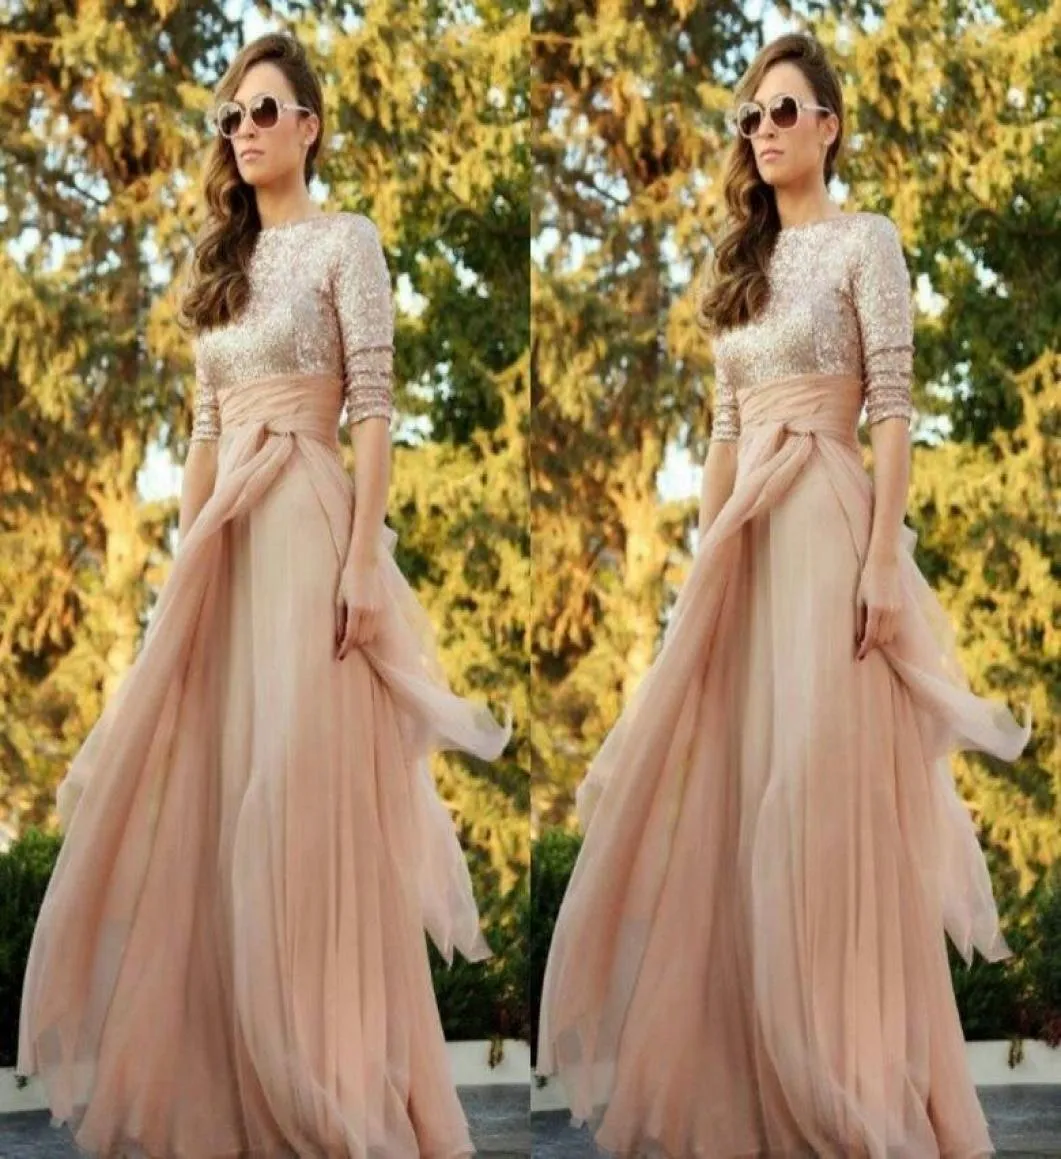 2020 Sparkly Blush Chiffon Bridesmaid Dresses Sexy Long Sleeve Sequins Floor Length Maid of Honor Dress Plus Size A Line Party Wea3752583